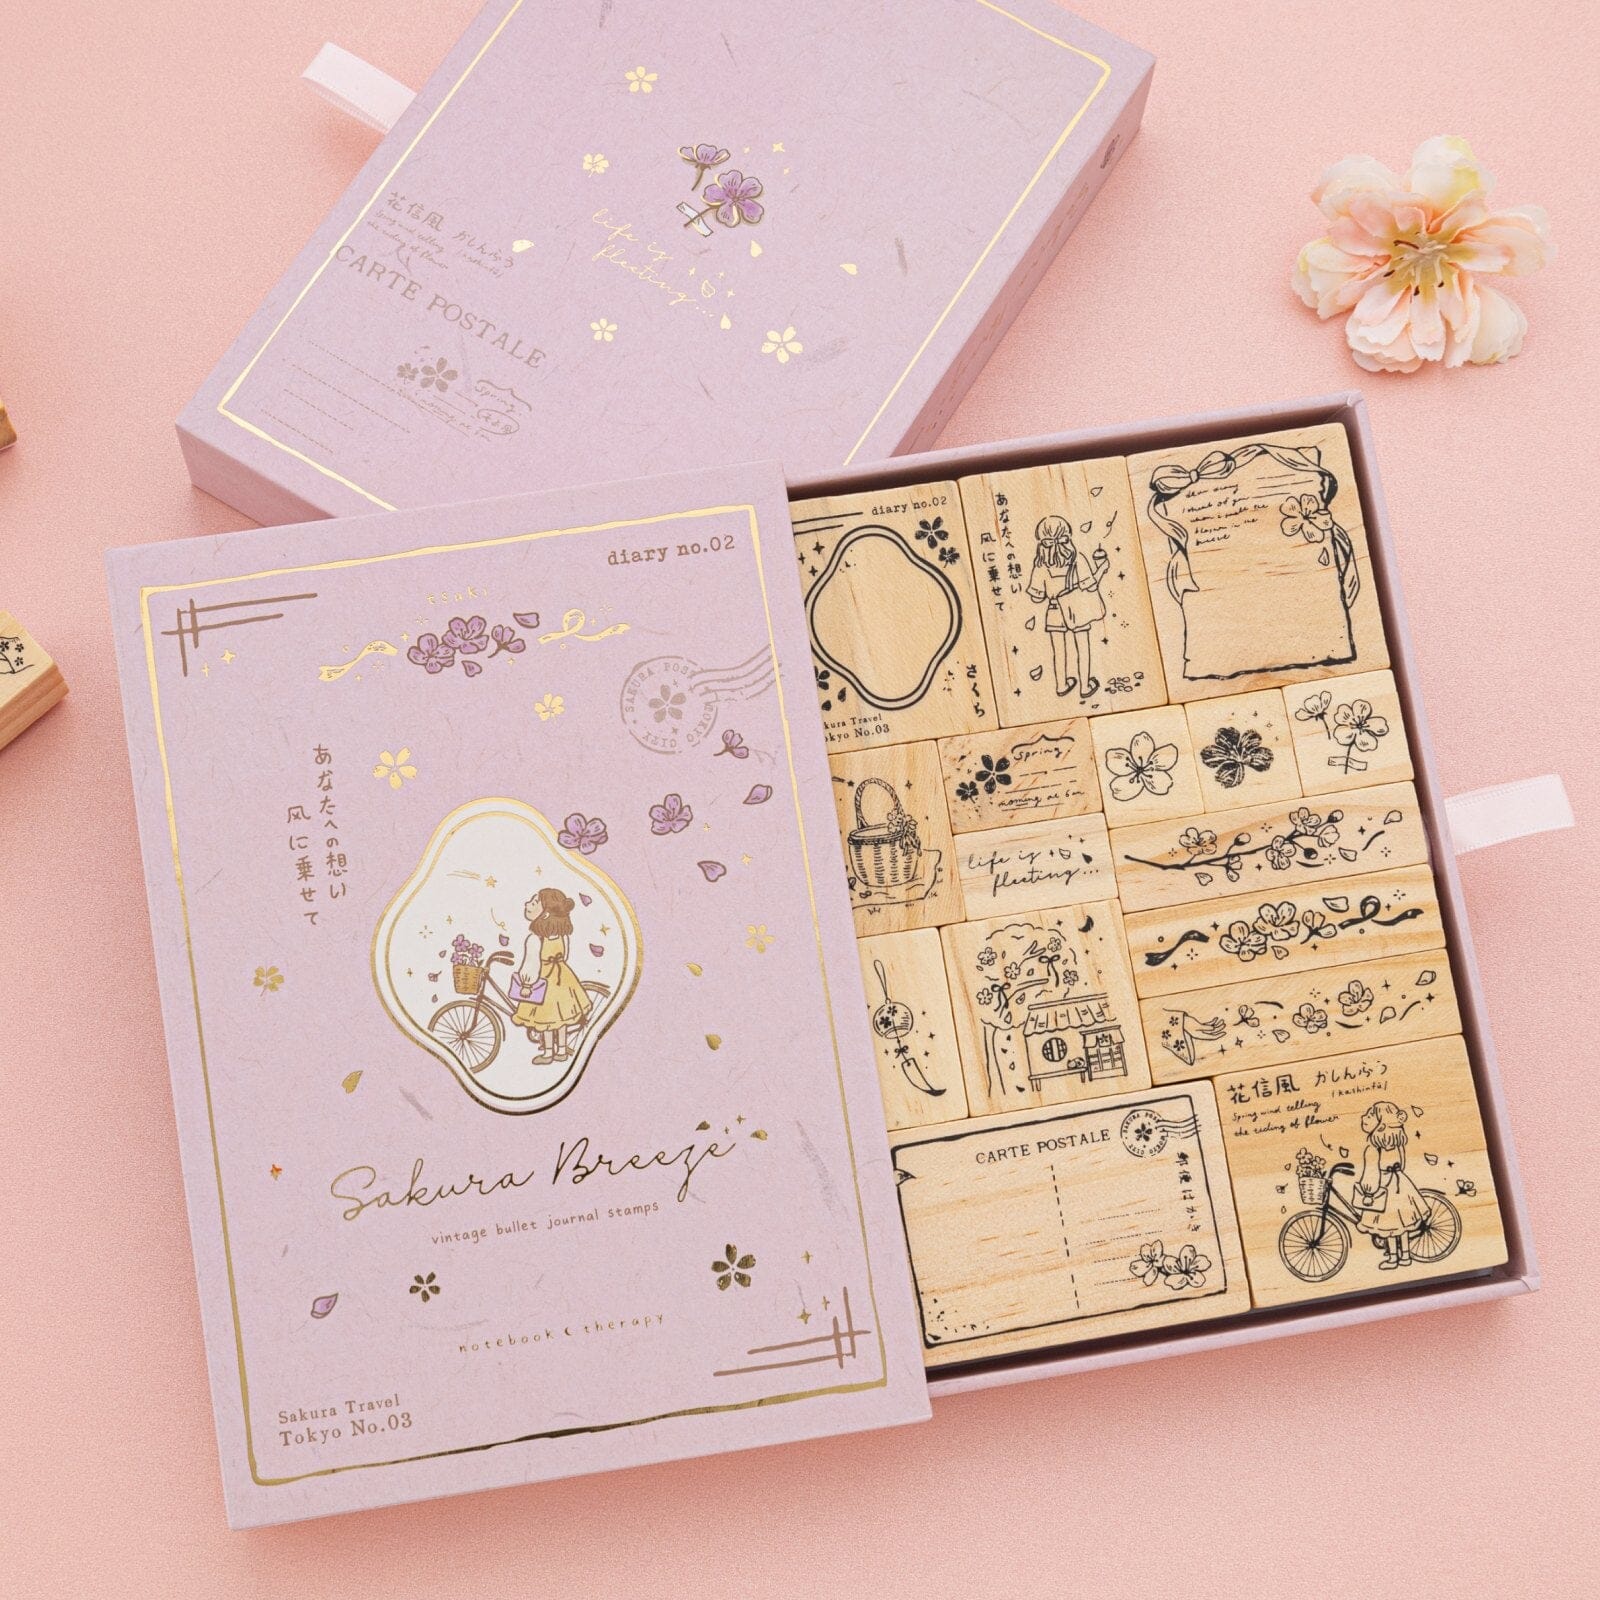 Tsuki 'Our Stories' Reading Journal Stamp Set ☾ – NotebookTherapy